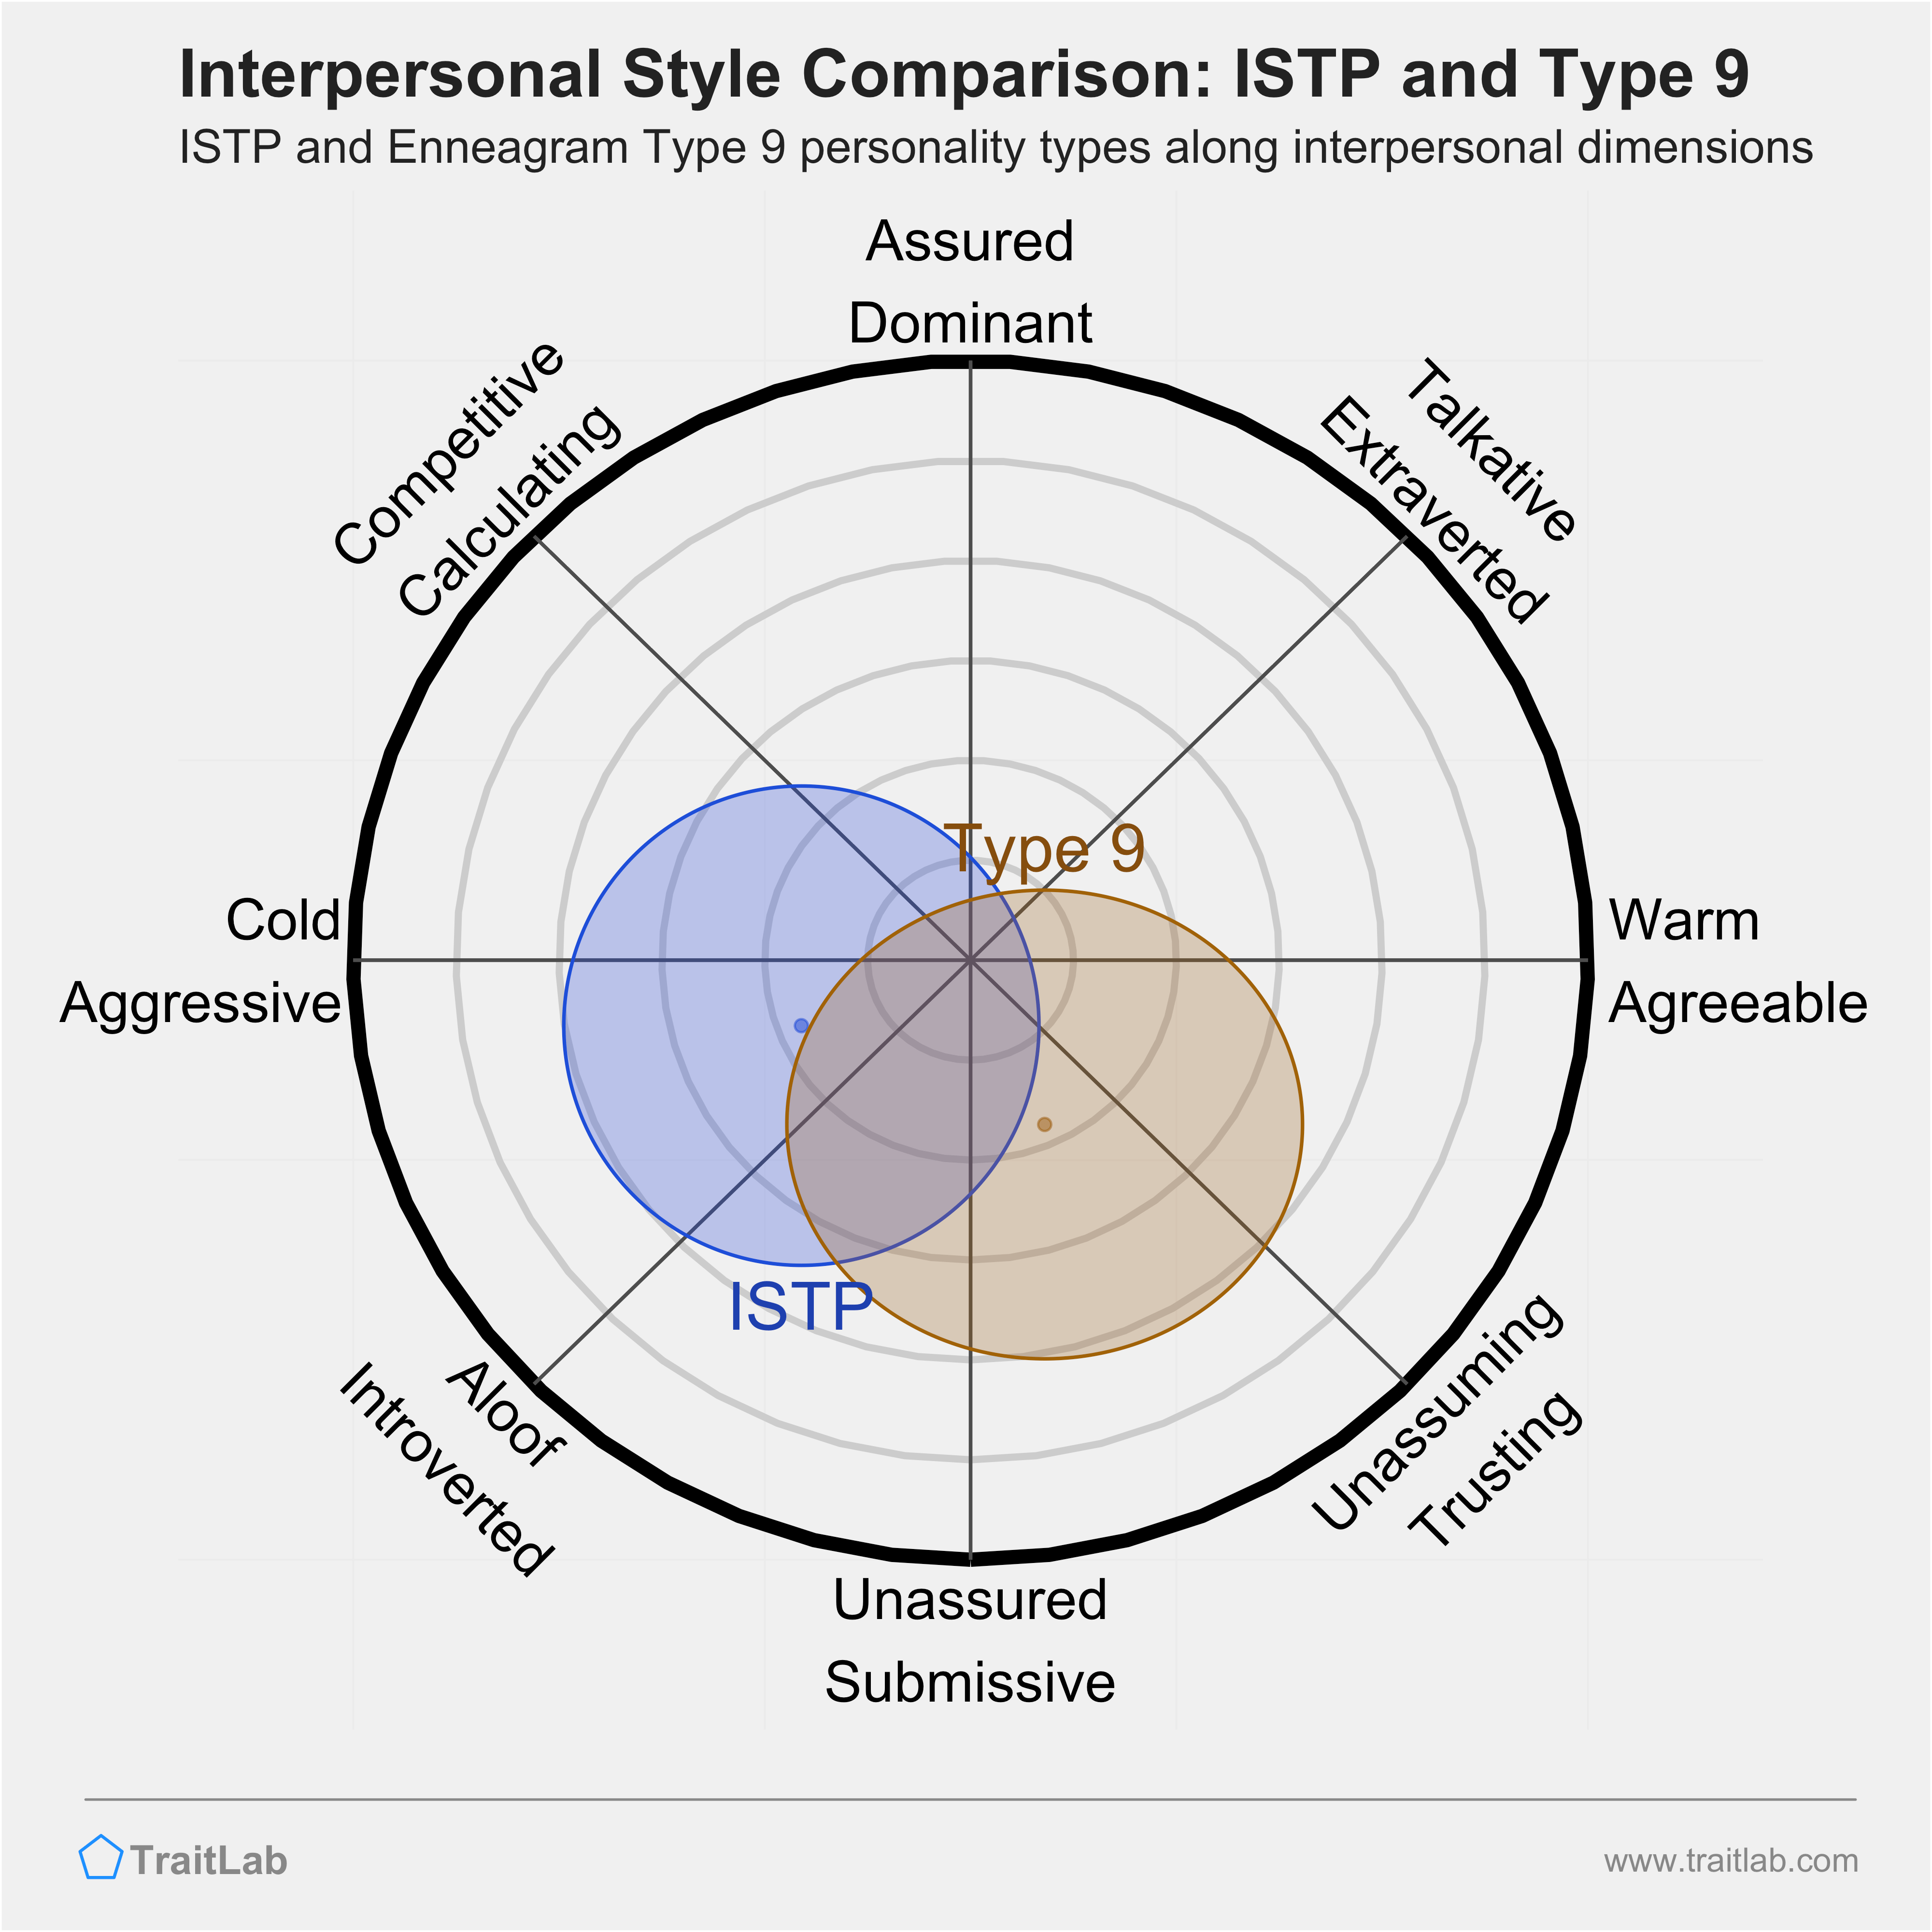 Enneagram ISTP and Type 9 comparison across interpersonal dimensions